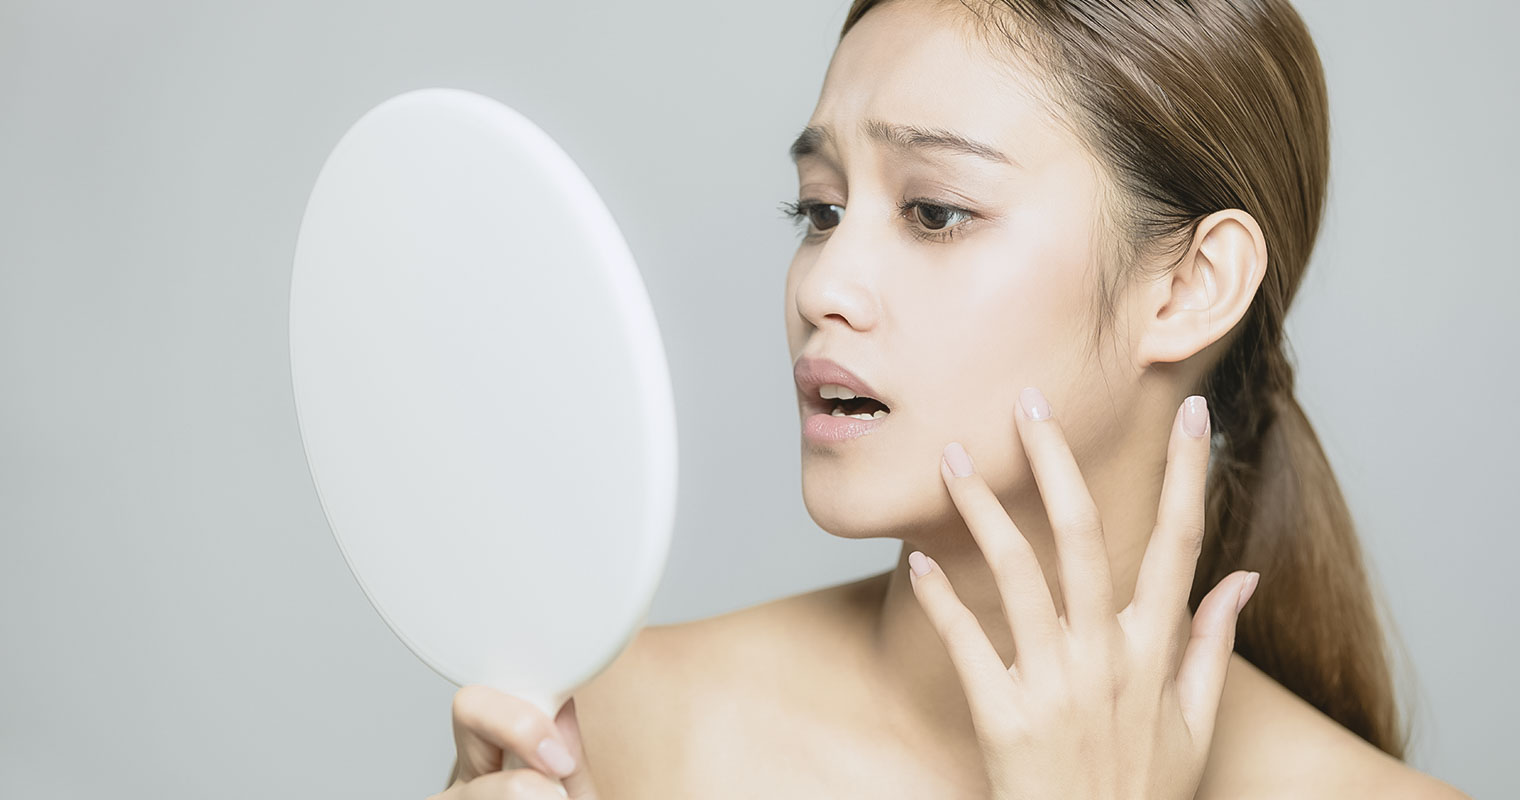 Woman looking into a mirror worried about her skin condition